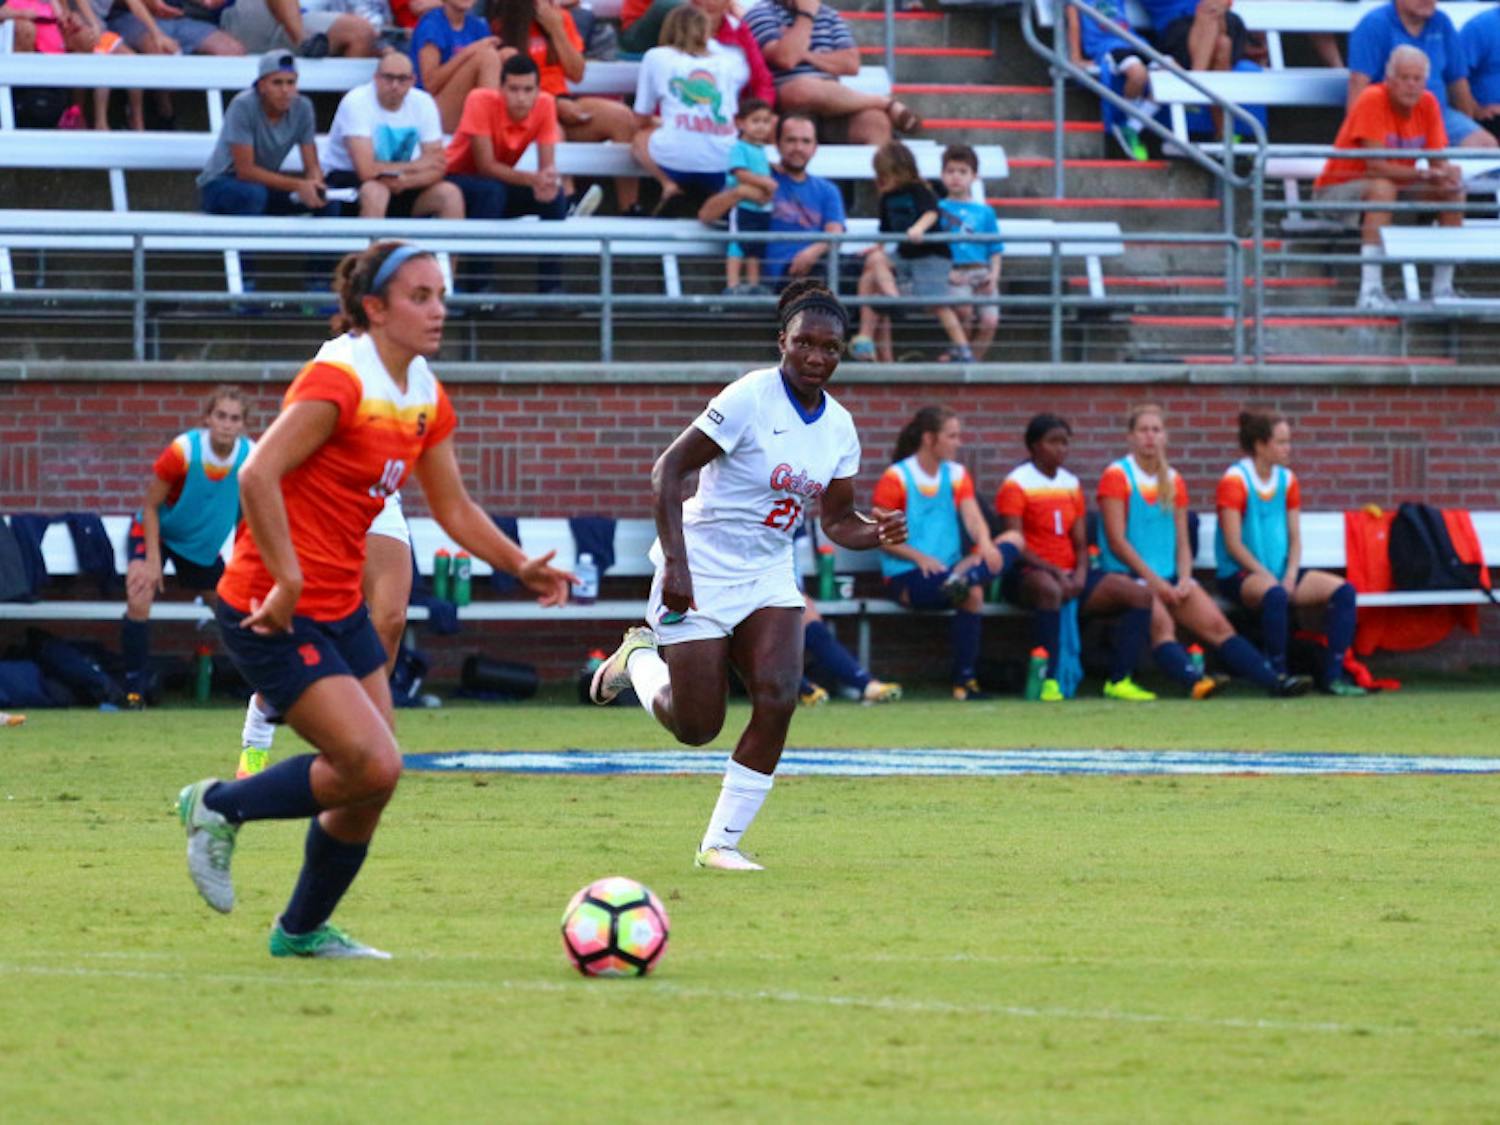 Deanne Rose chases a Syracuse player with possession of the ball during Florida's 2-1 win against the Orange on Aug. 27 at Donald R. Dizney Stadium.